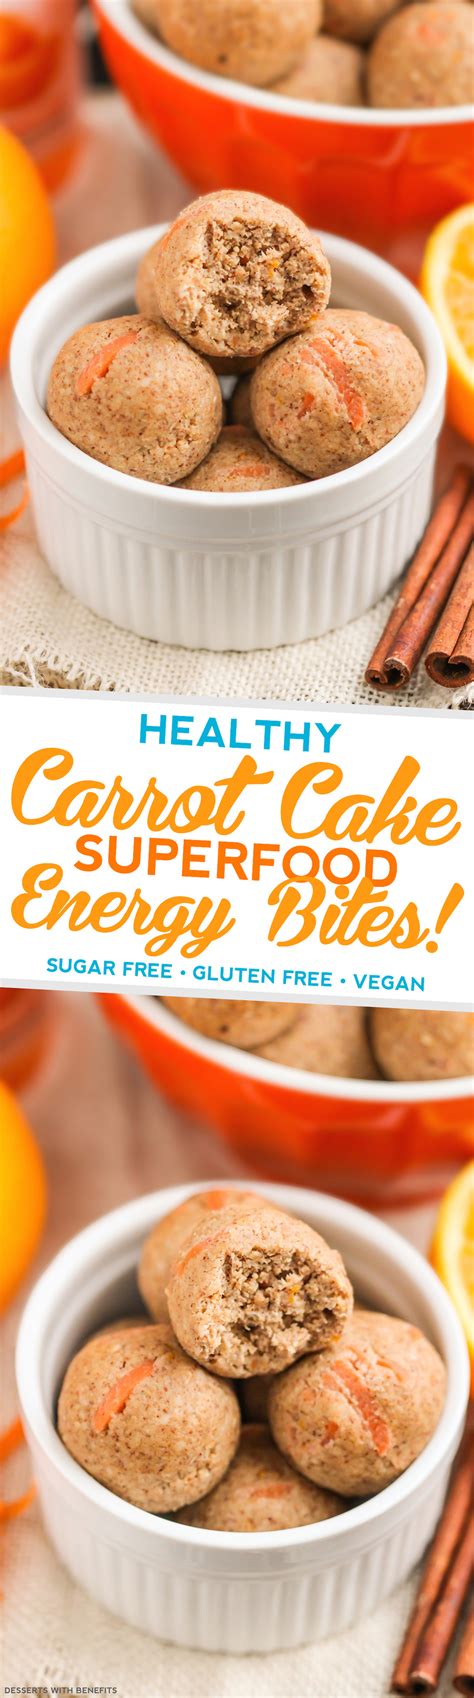 If you crave a candy that's healthy, low carb, sweet but not sickly, that crumbles and melts in your mouth, halva ticks all the boxes. Desserts With Benefits Healthy Carrot Cake Energy Bites (refined sugar free, gluten free, vegan ...